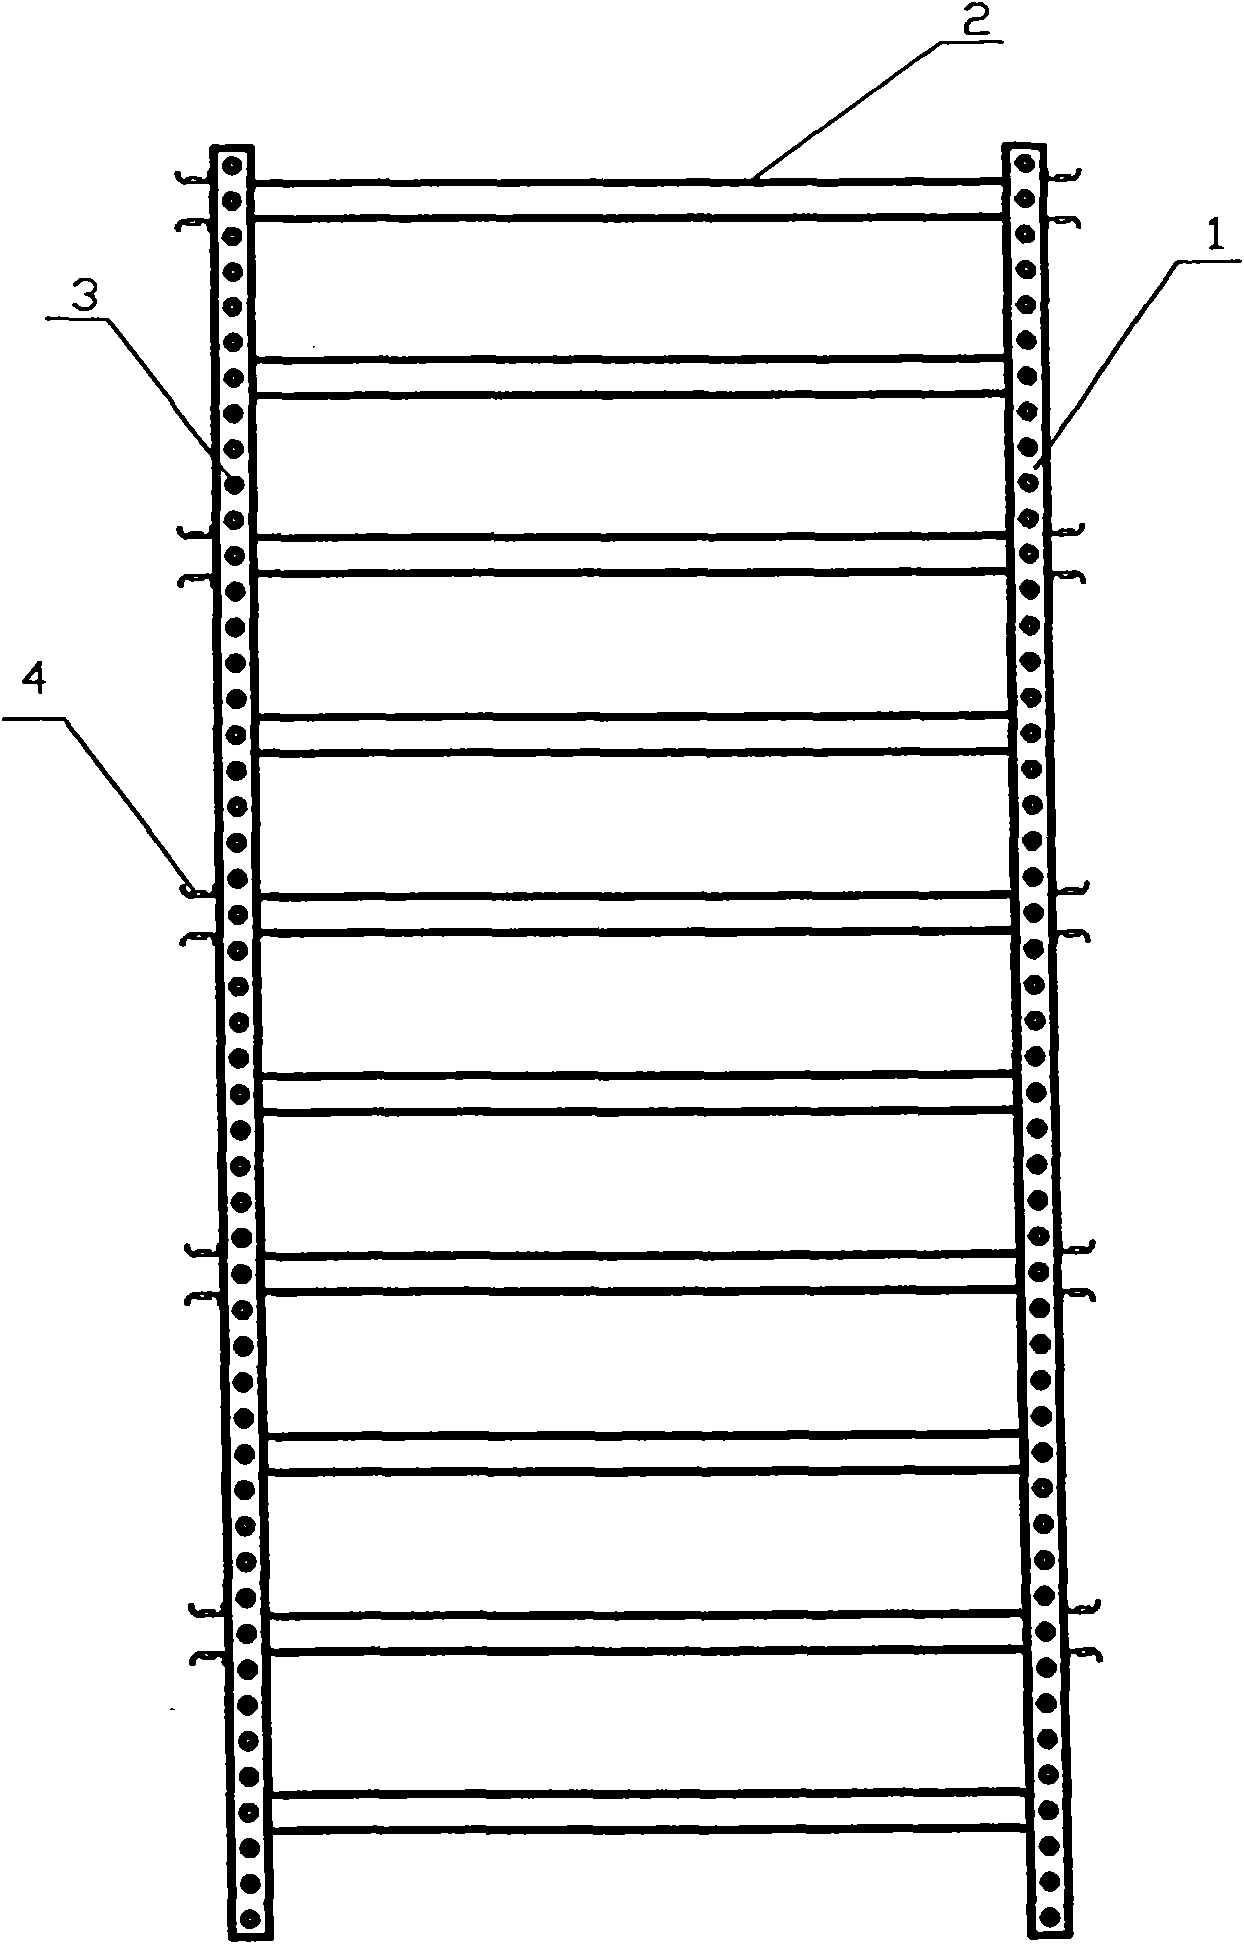 Precise building mold support frame system for reinforcing building templates and use method thereof